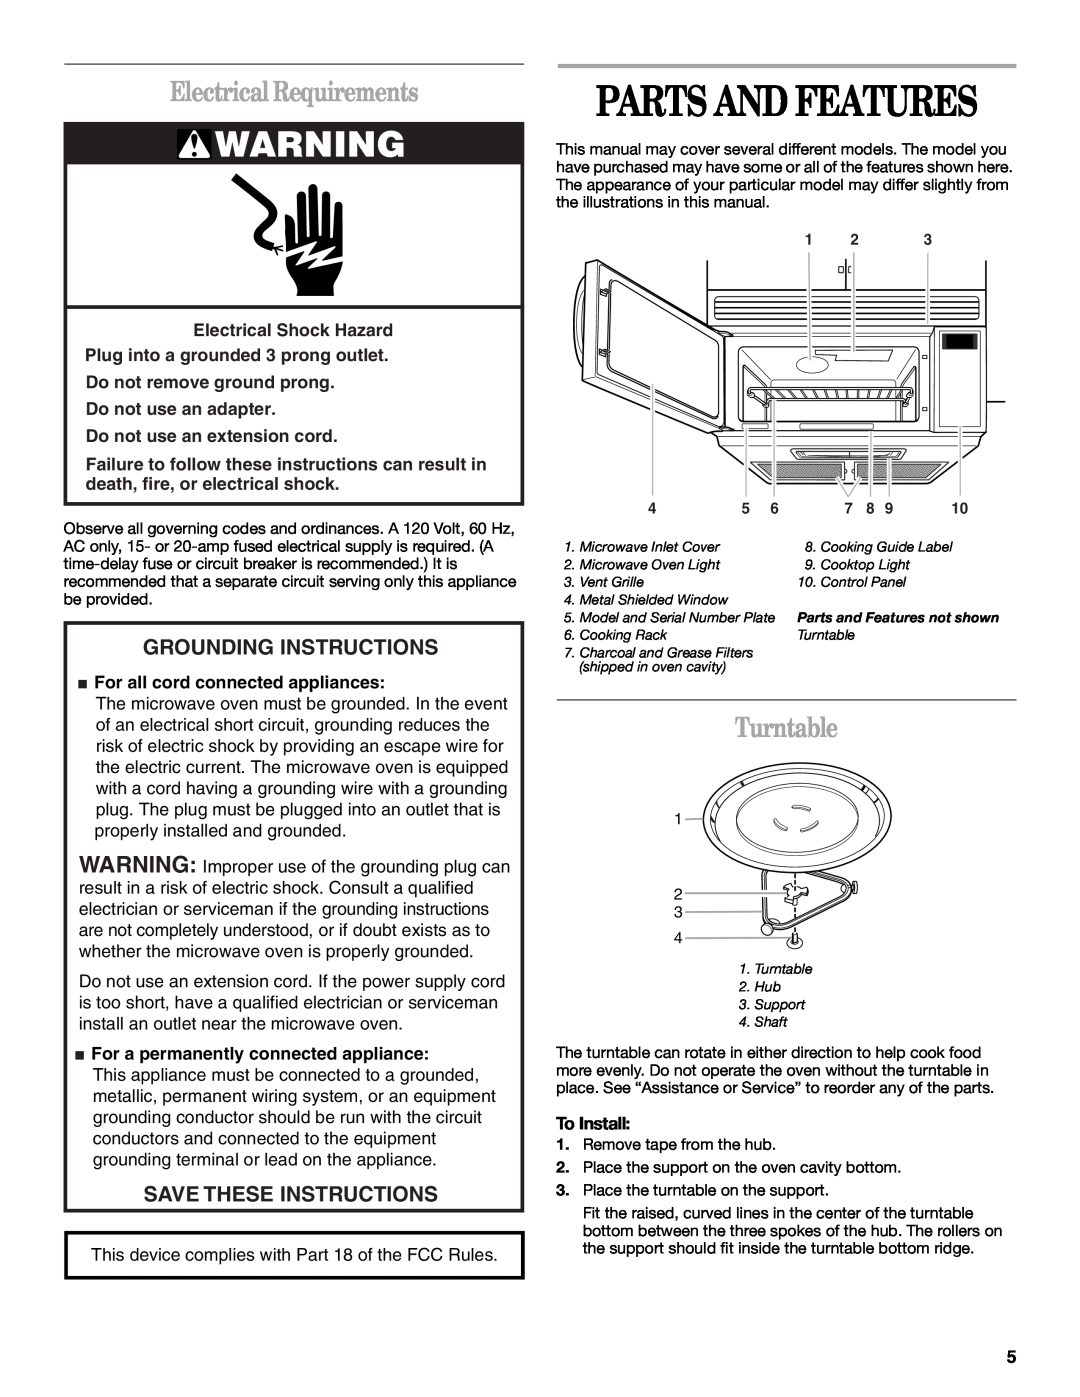 Whirlpool MH8150XM Parts And Features, Electrical Requirements, Turntable, Grounding Instructions, Save These Instructions 